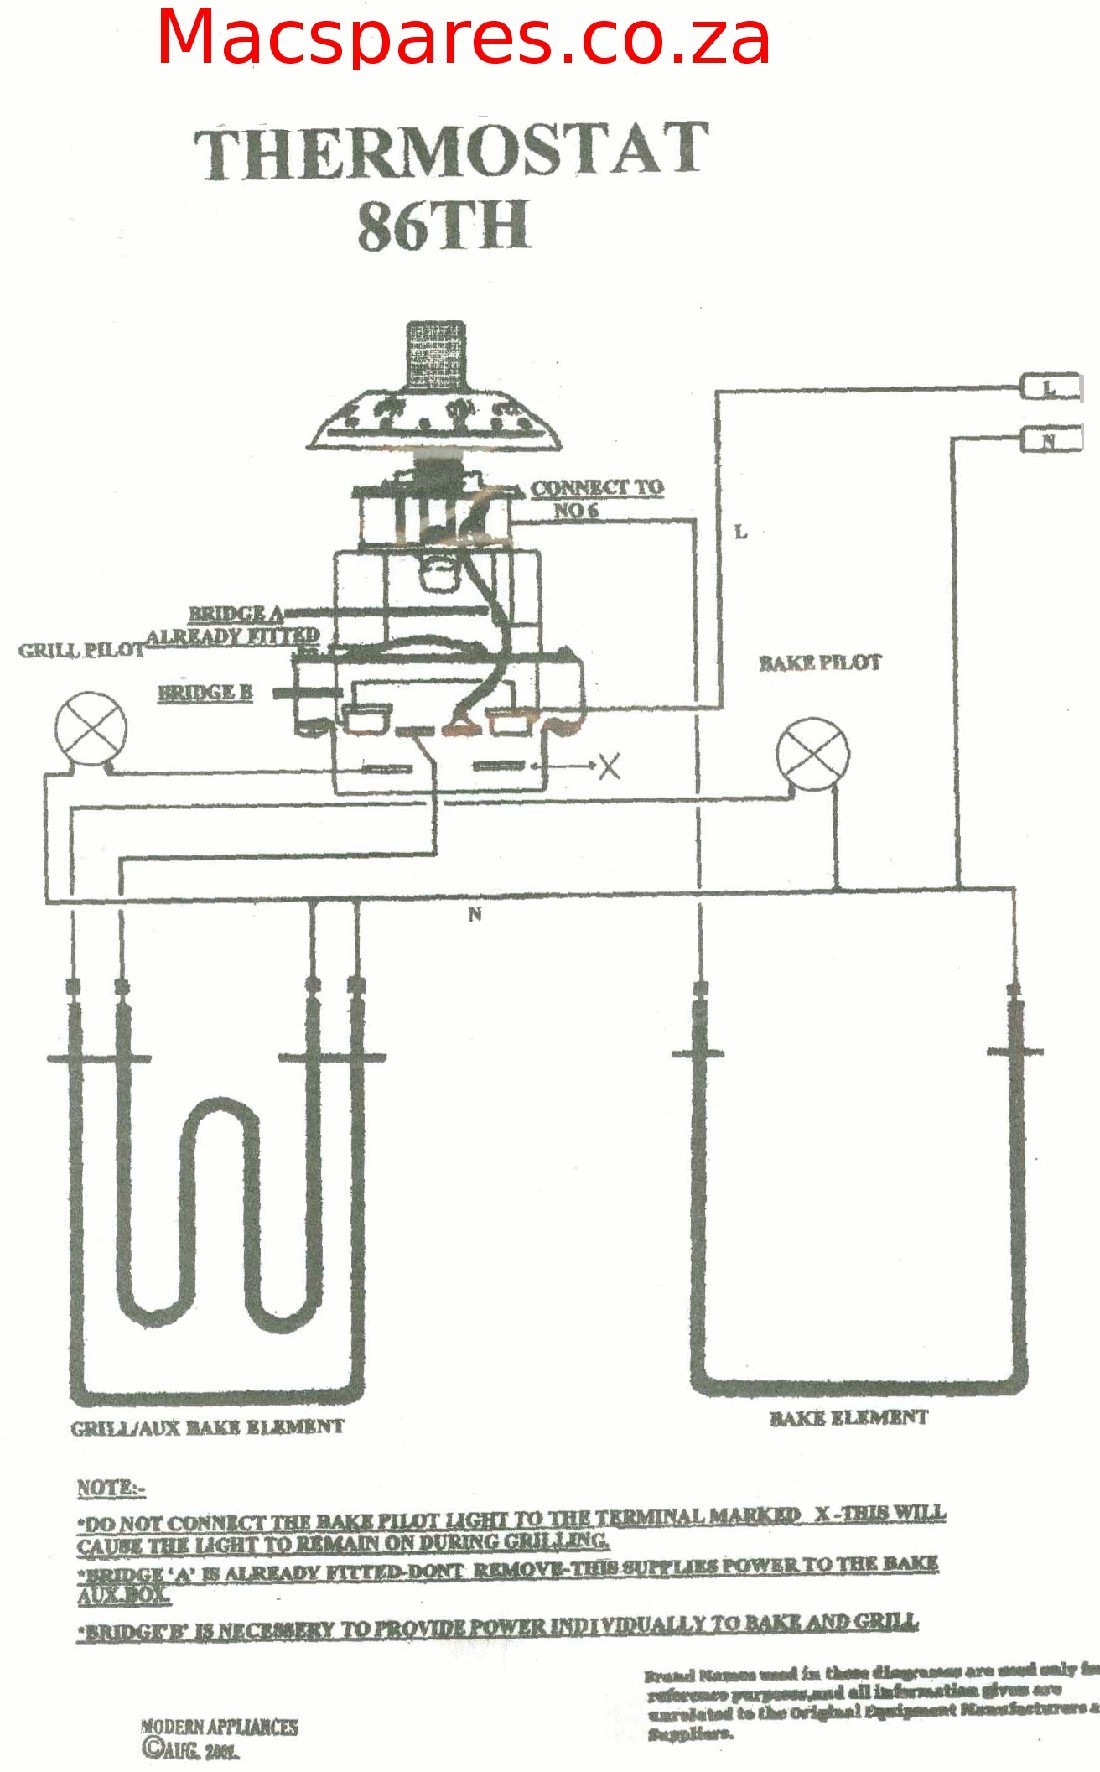 Wiring Diagram for Electric Stove New Electric Stove Wiring Diagram Wiring Diagram for Electric Stove